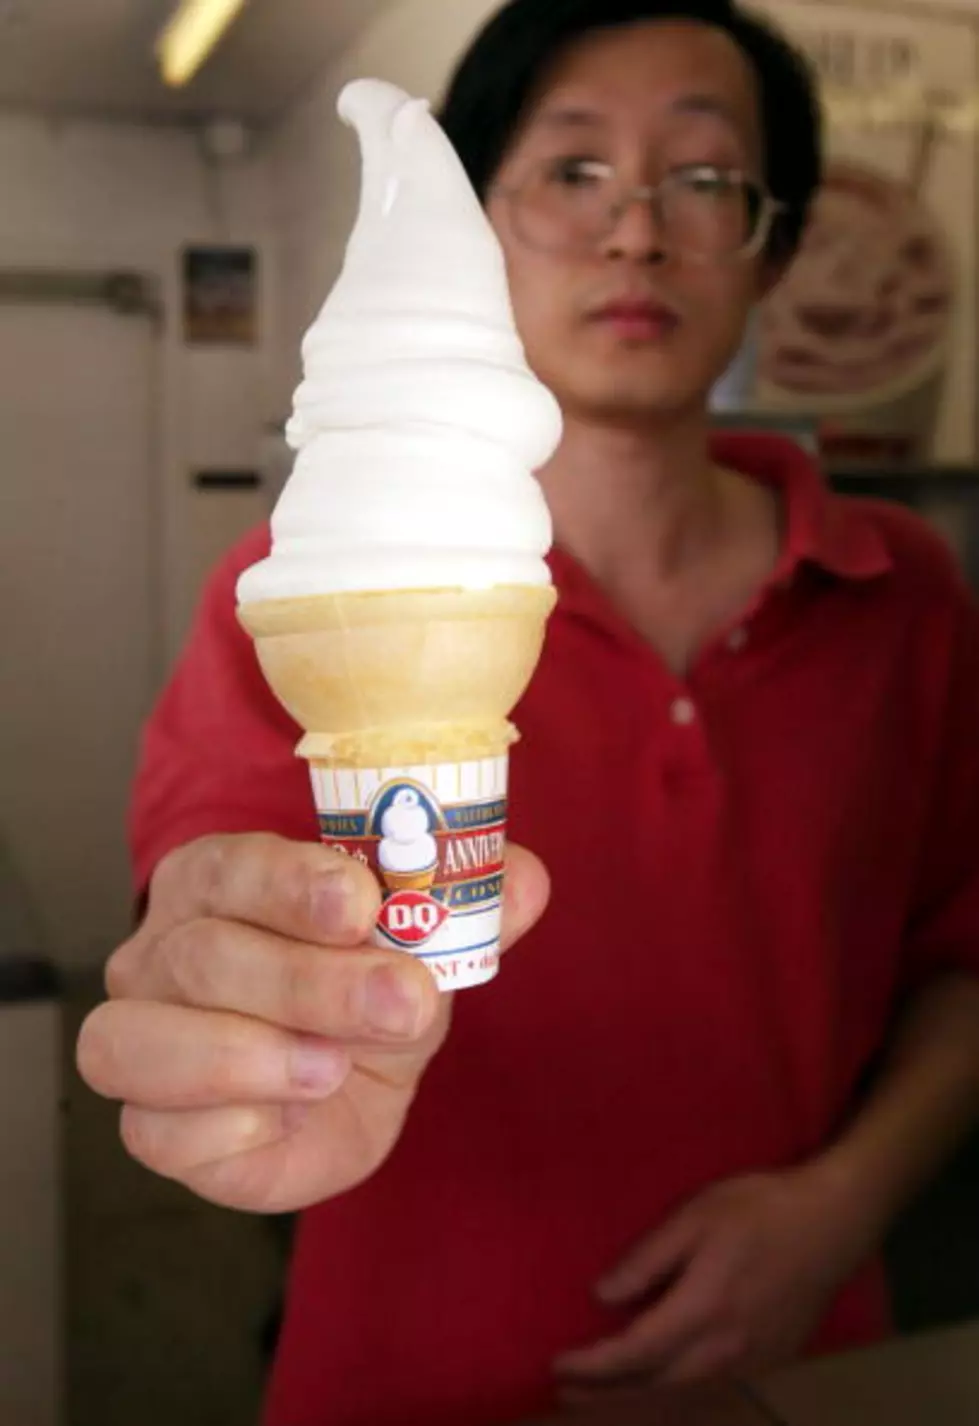 Dairy Queen Offers Miracle Treats Today &#8211; What Other Closed Businesses Do You Miss